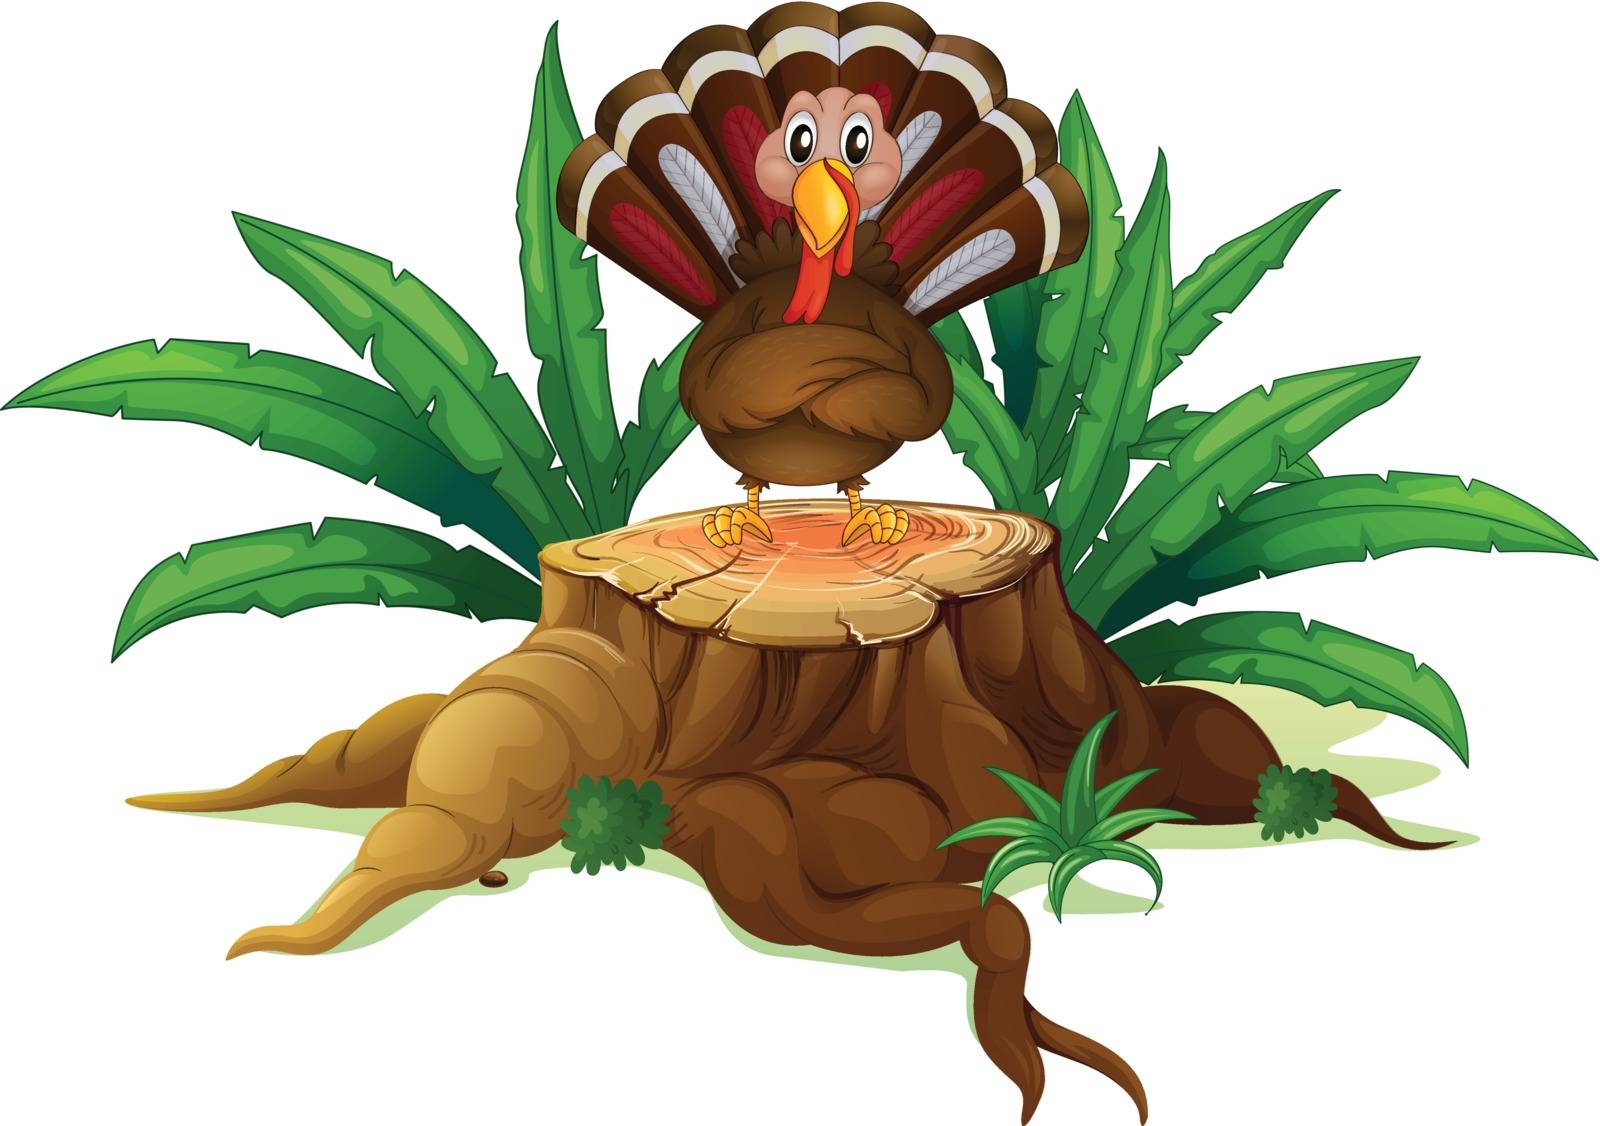 Illustration of a turkey above the stump on a white background